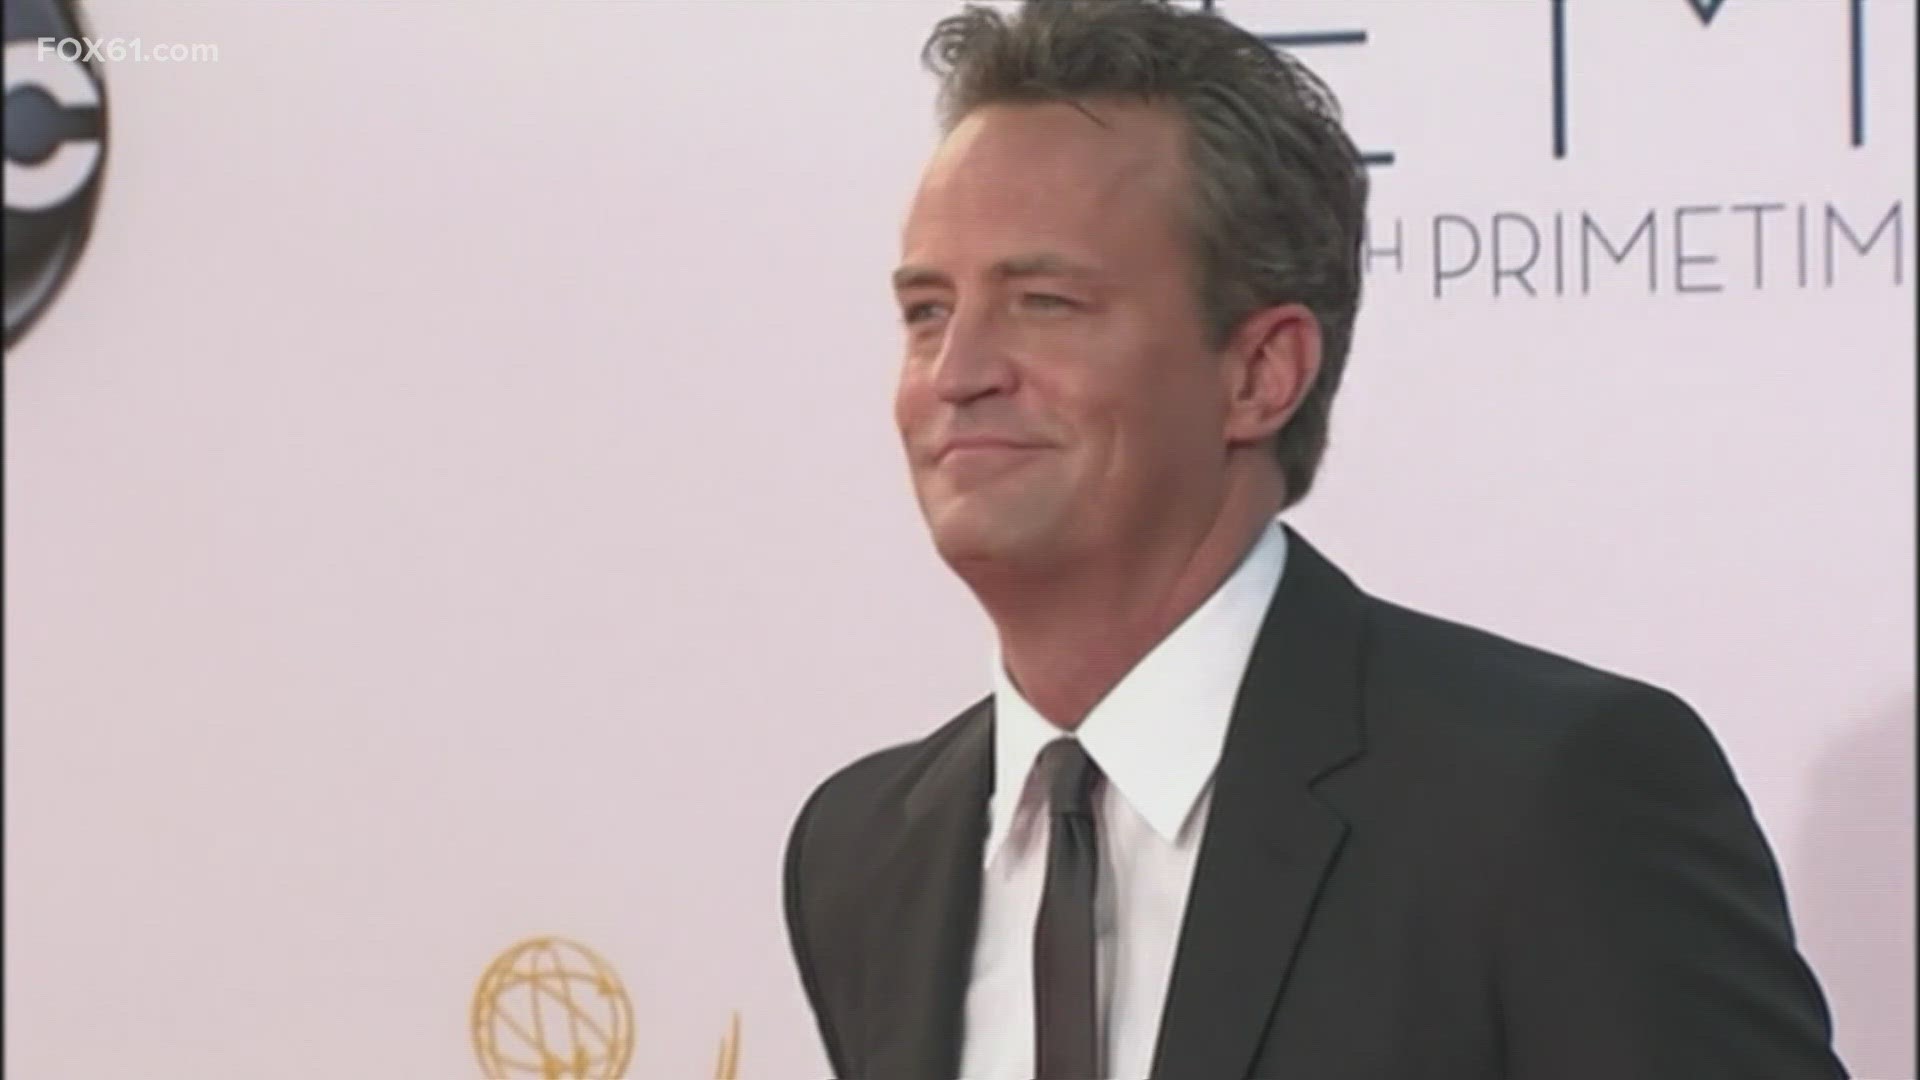 Sources told TMZ and the L.A. Times that there were no signs of foul play in actor Matthew Perry's death.